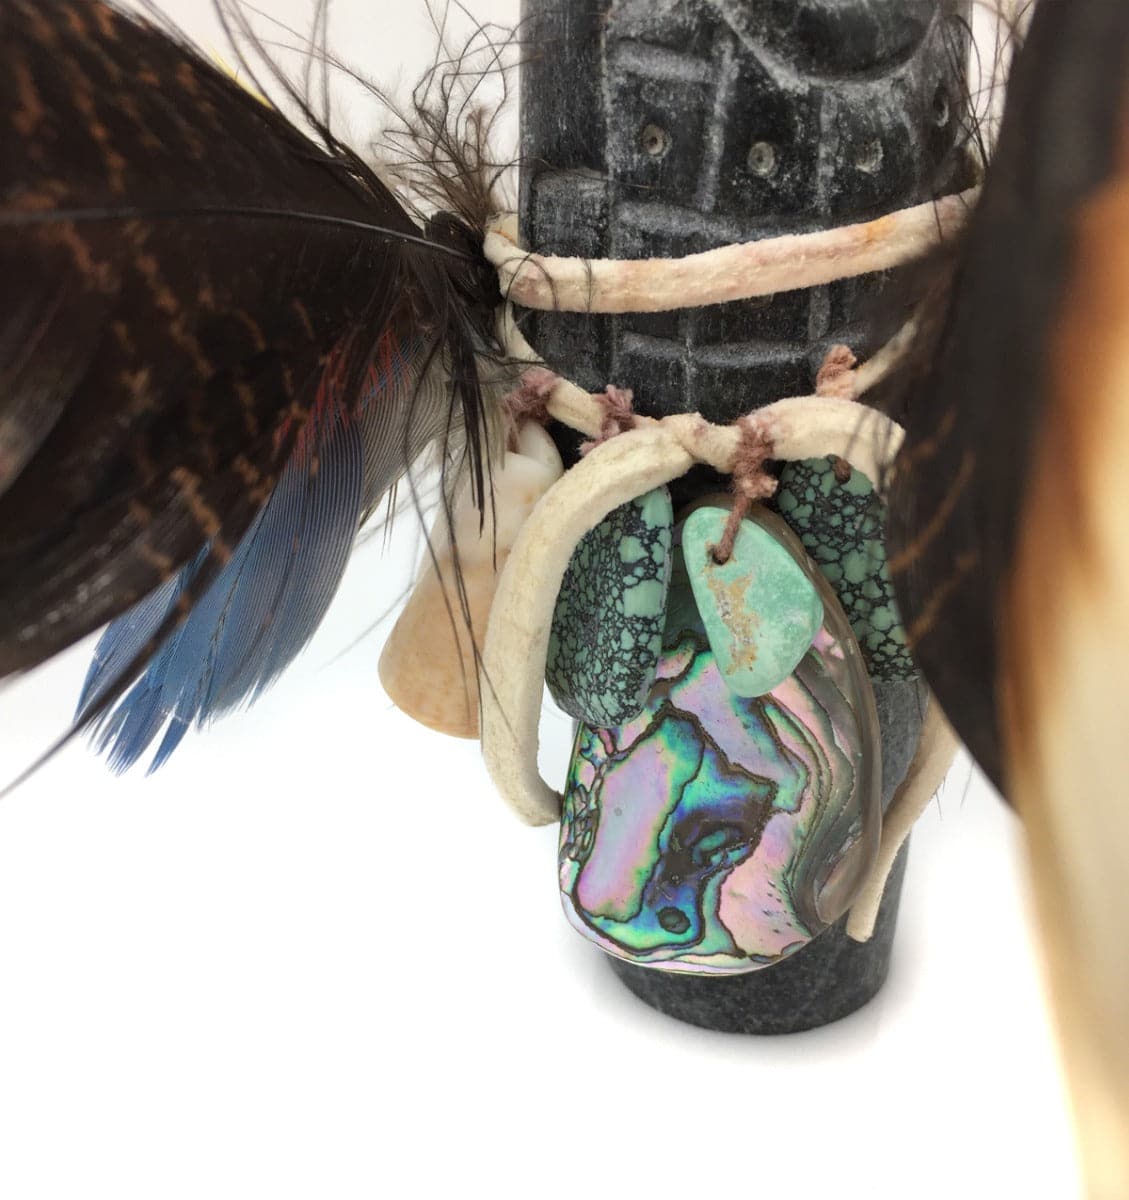 Mark Suazo â€“ Zuni Stone Fetish Human Figurine with Feathers, Turquoise, Abalone, and Shell, 1993, 6" x 2' x 2" (M1800-123)1